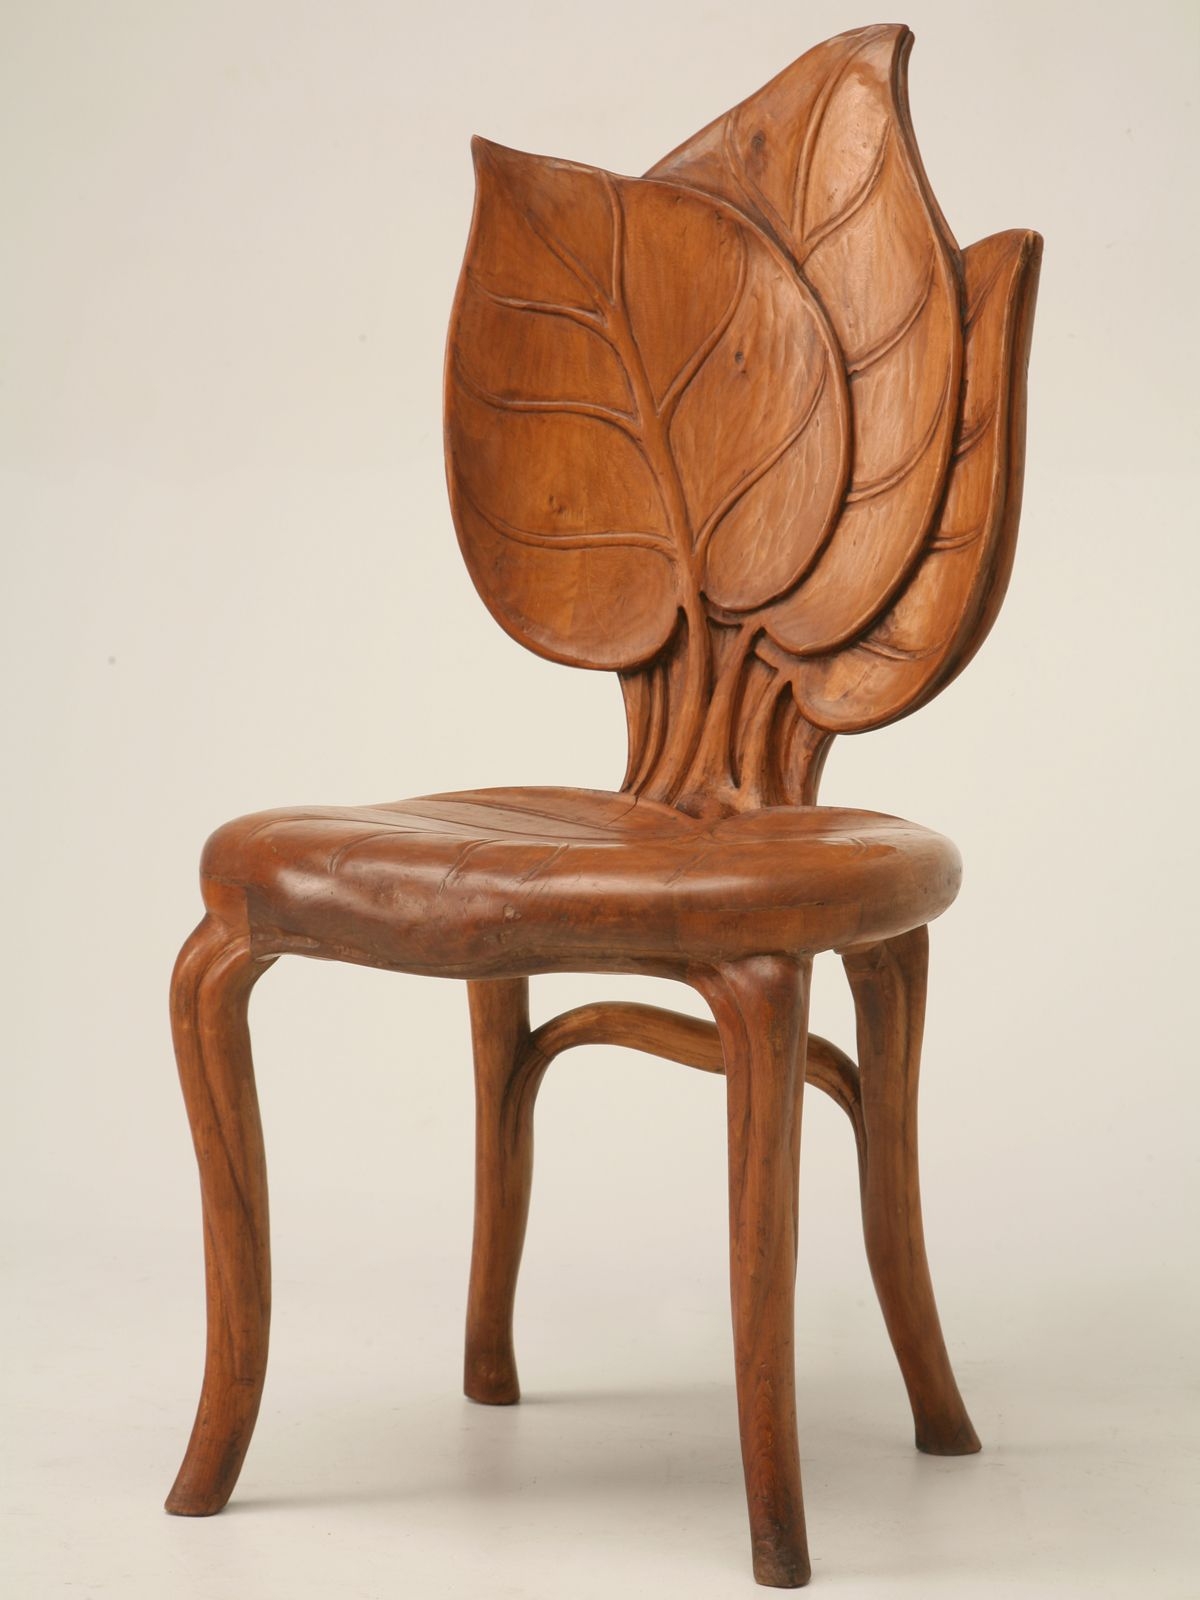 Hand carved chair 1